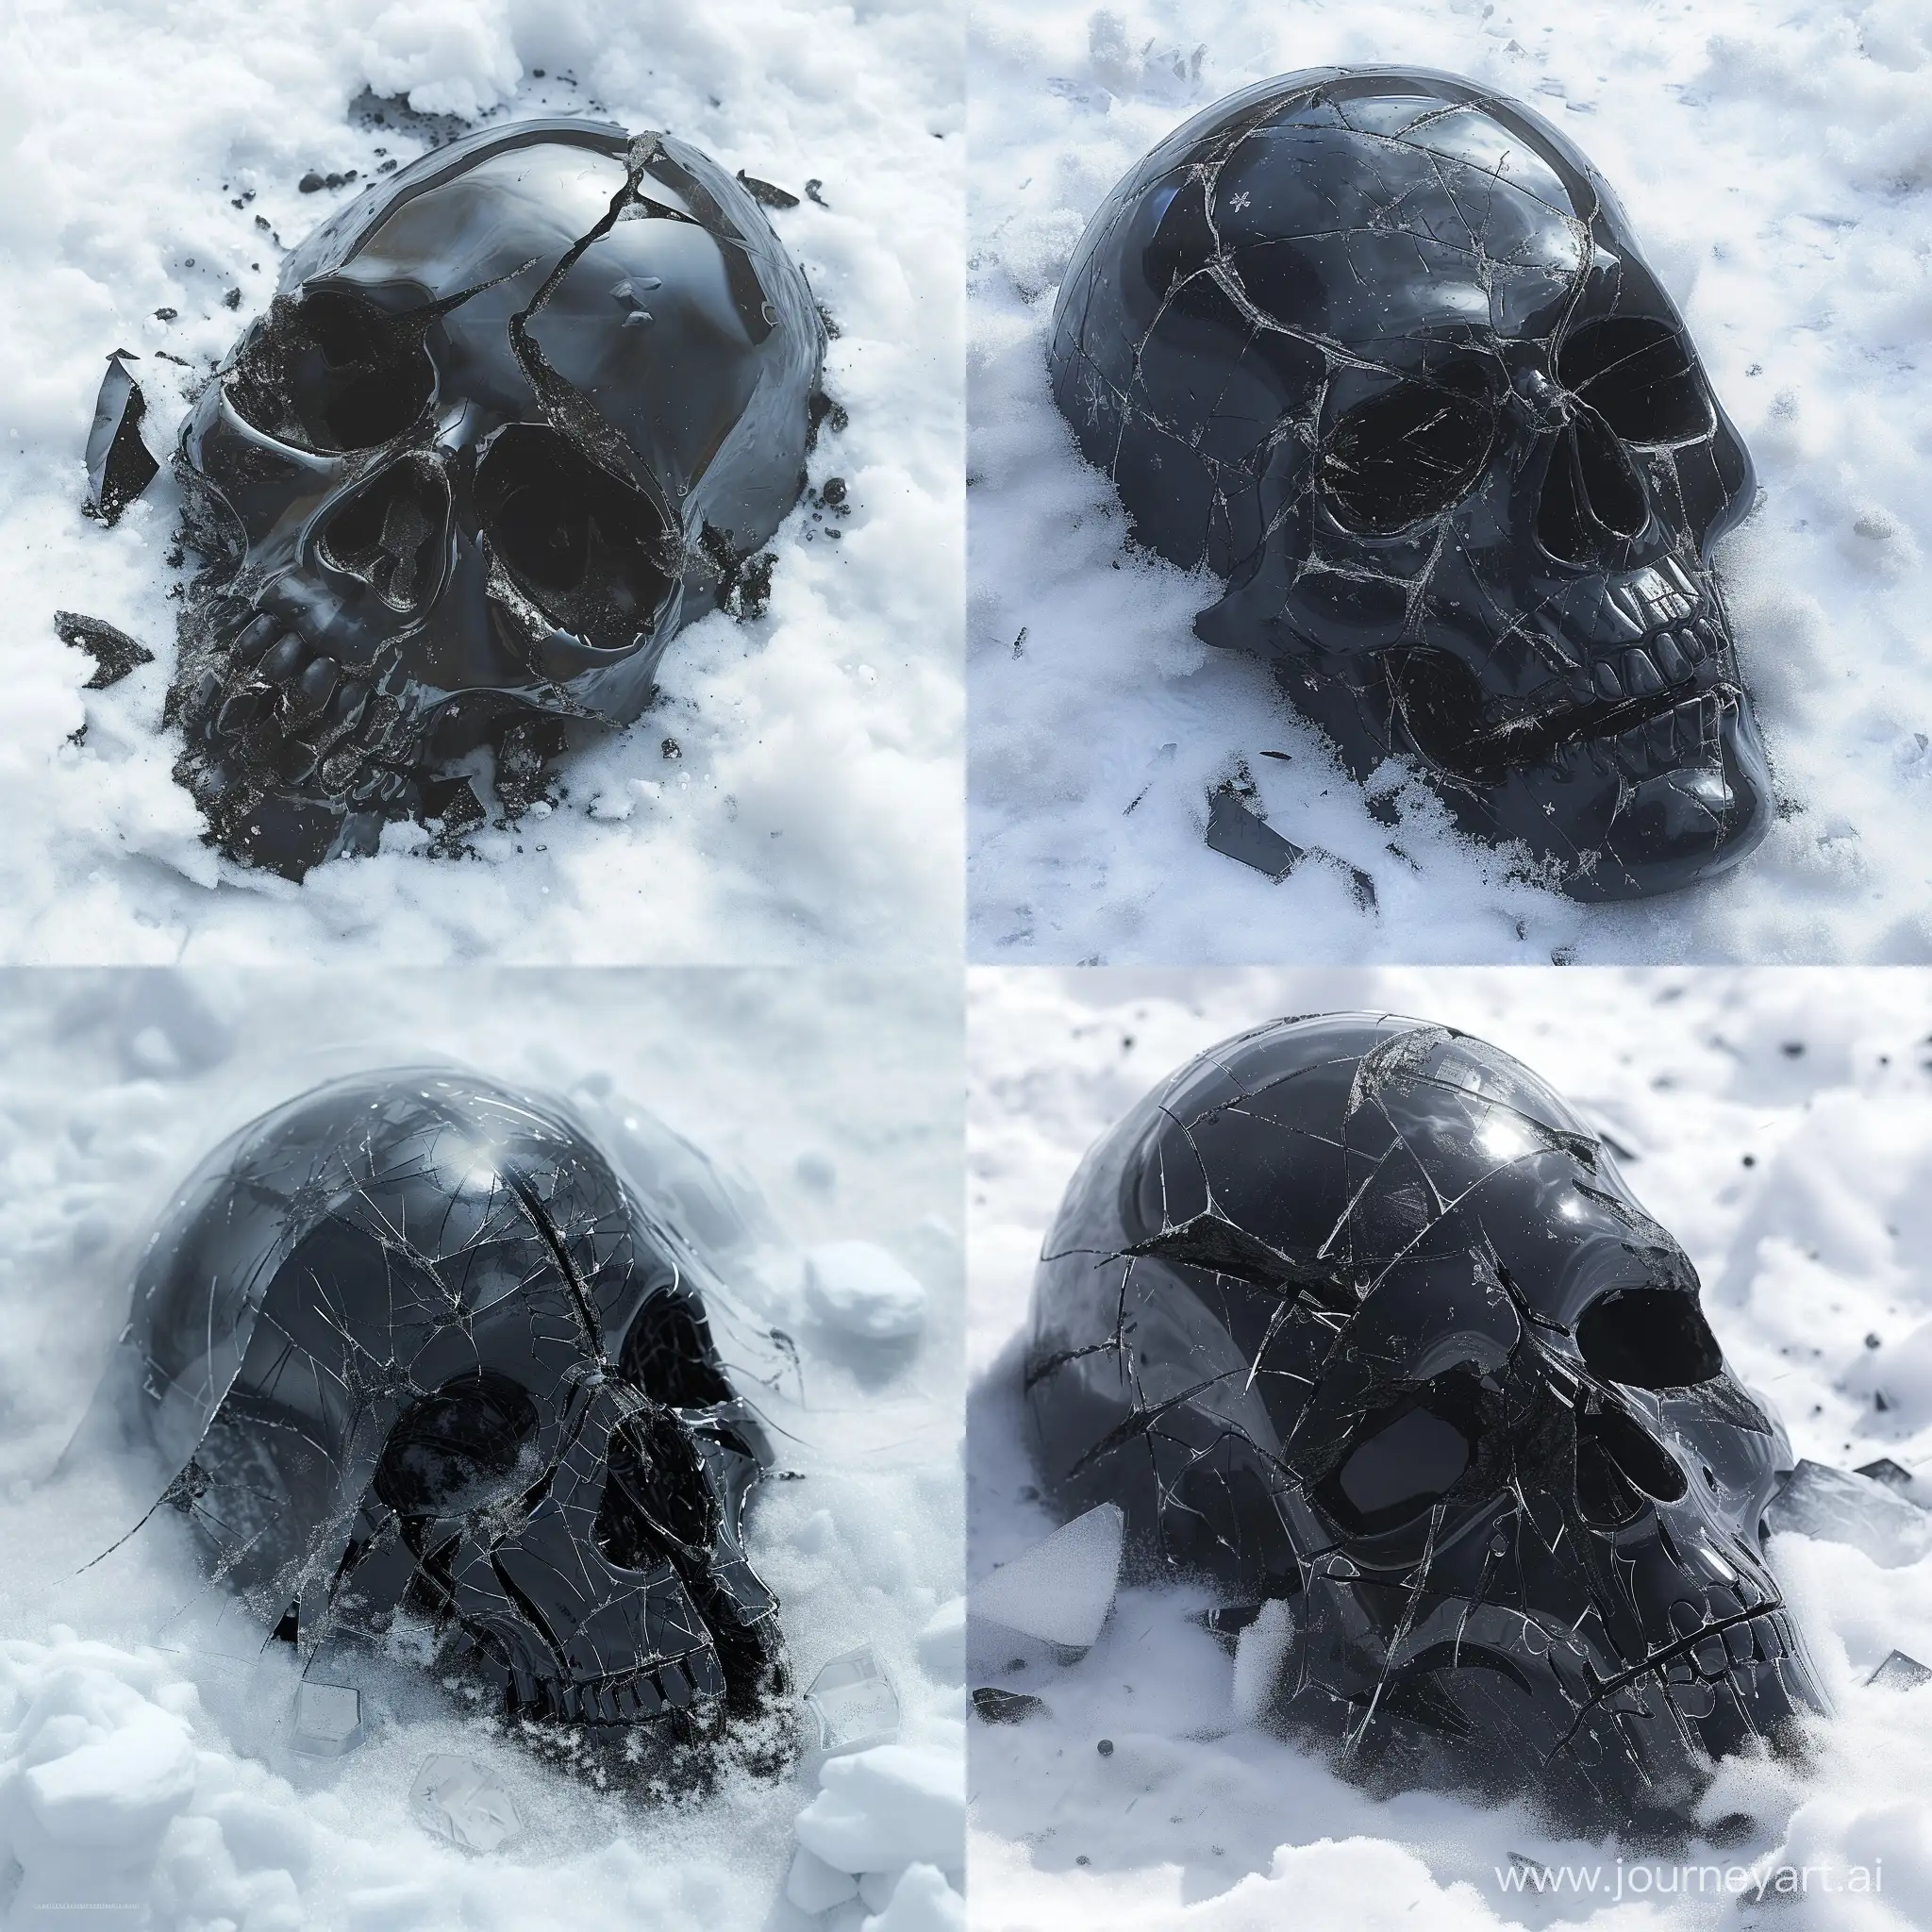 music album cover, clear art, black reaper sсi fi  mask lies in the snow, cracked, darksouls style